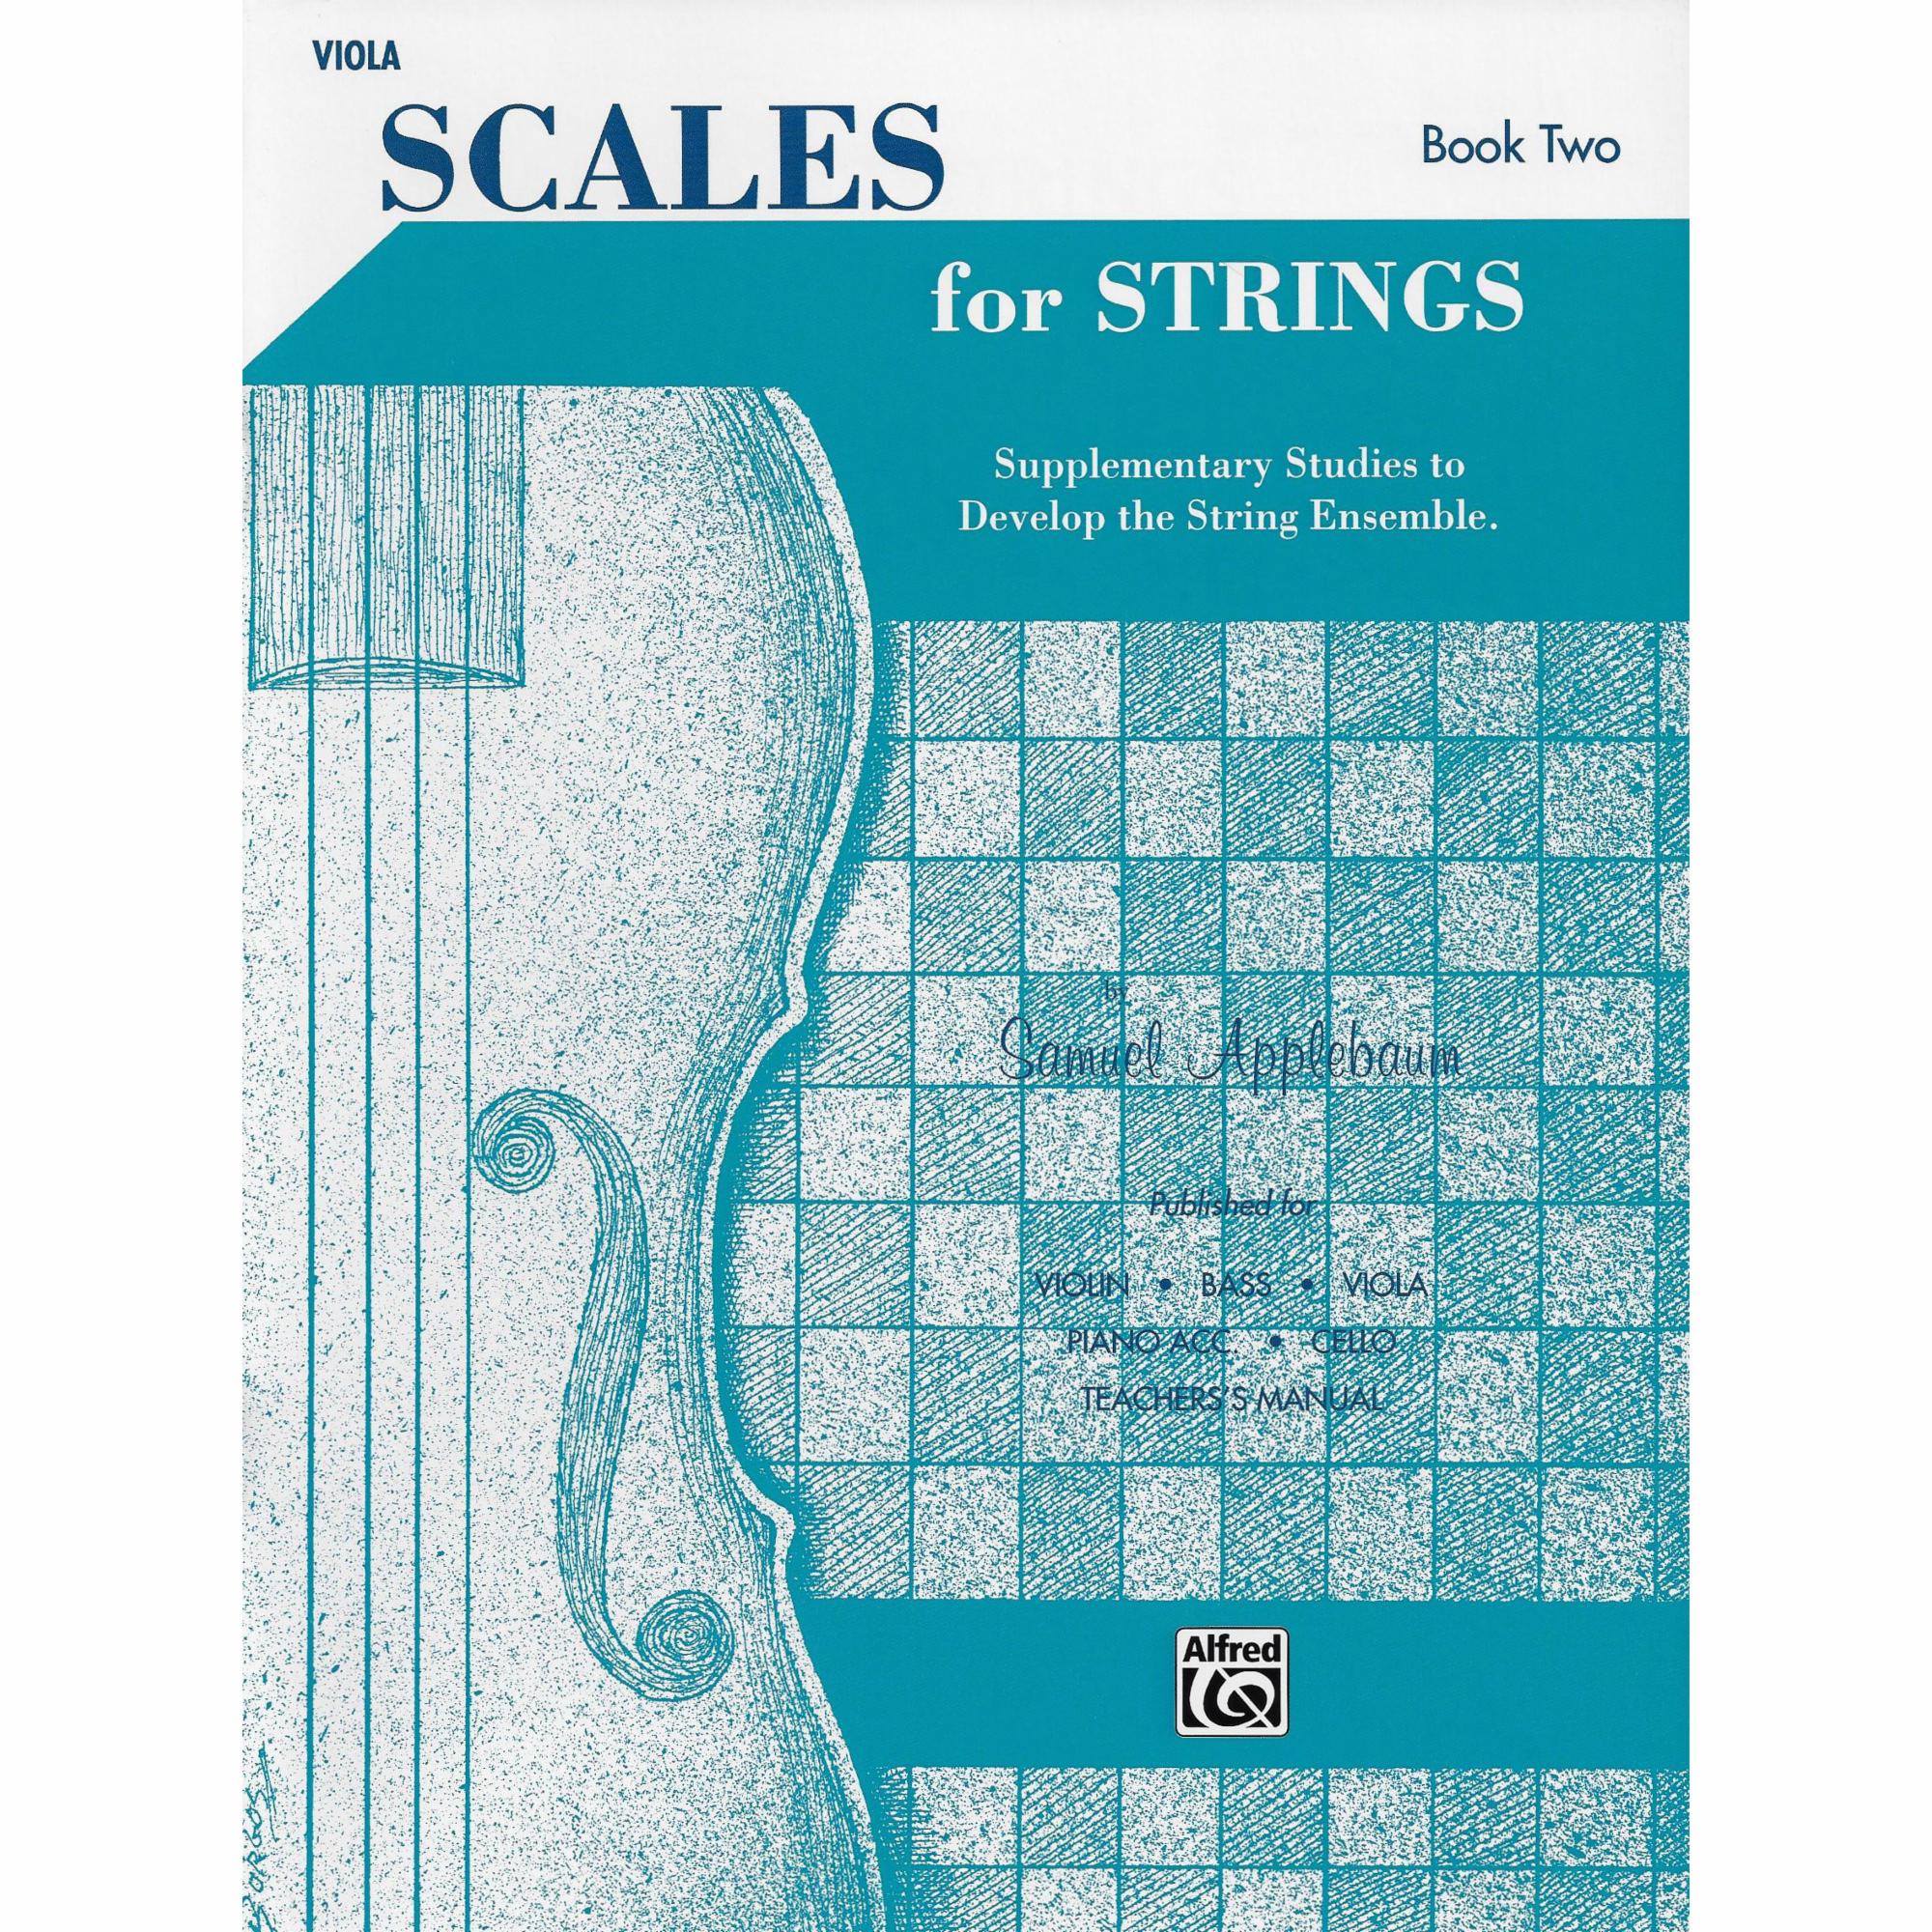 Scales for Strings, Book Two